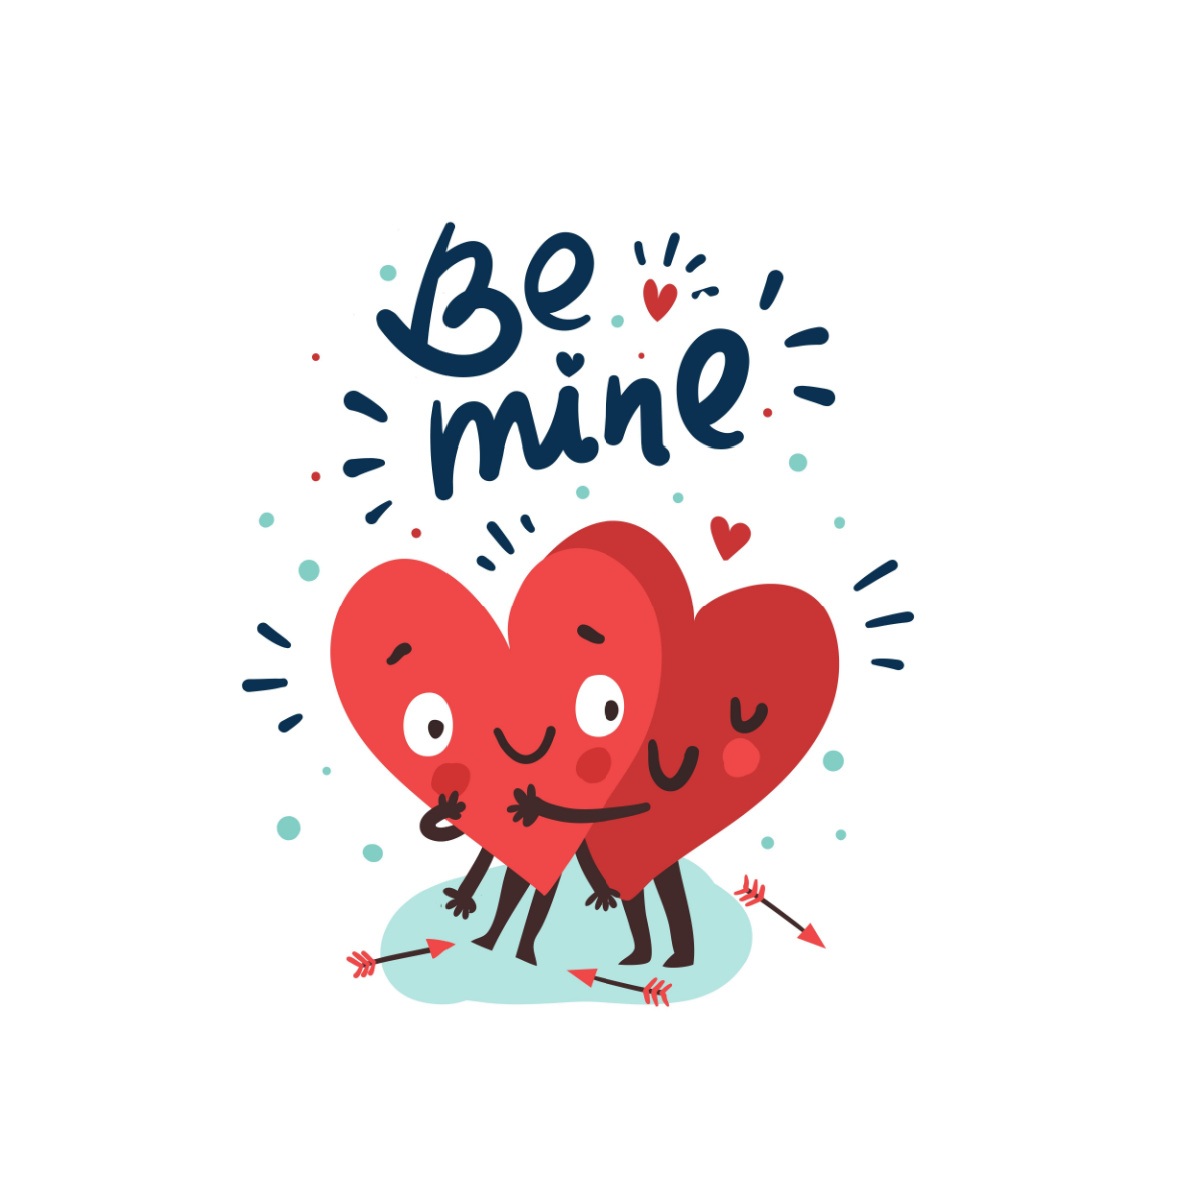 Two cartoon hearts hugging each other standing above Cupid's arrows, with text above them that says "be mine" in blue writing.